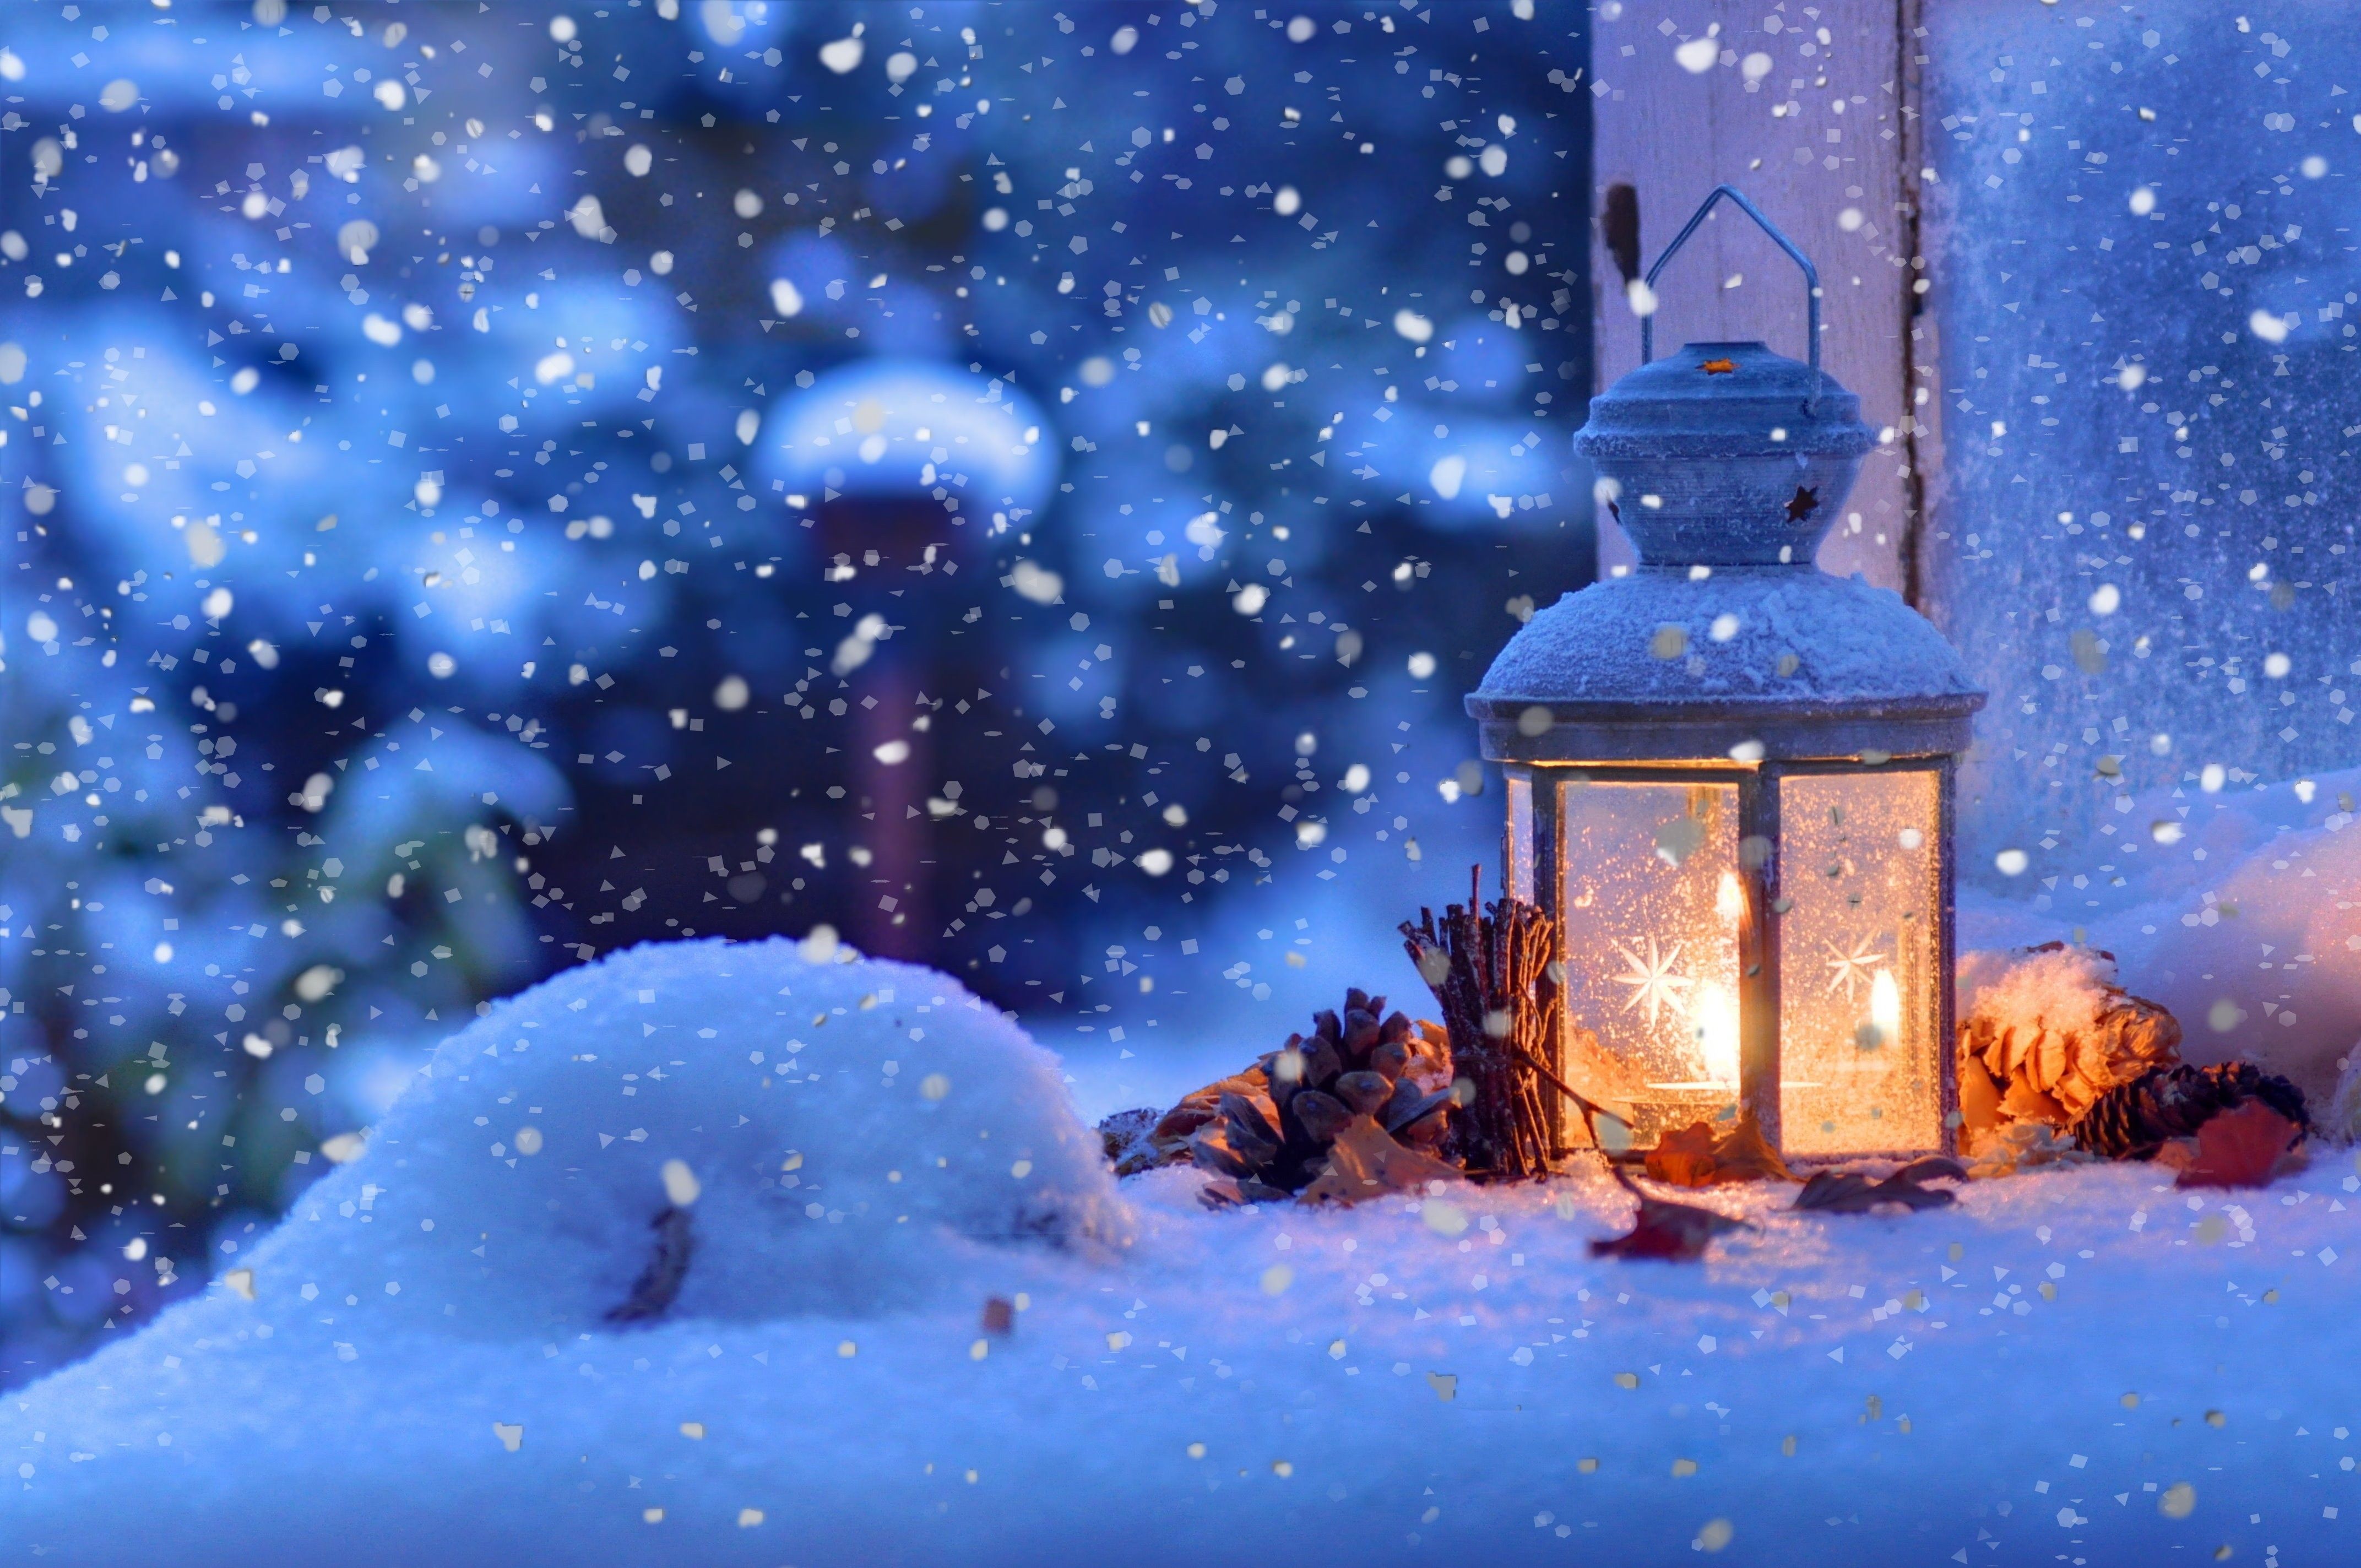 Snow Fall Wallpaper Free Snow Fall Background